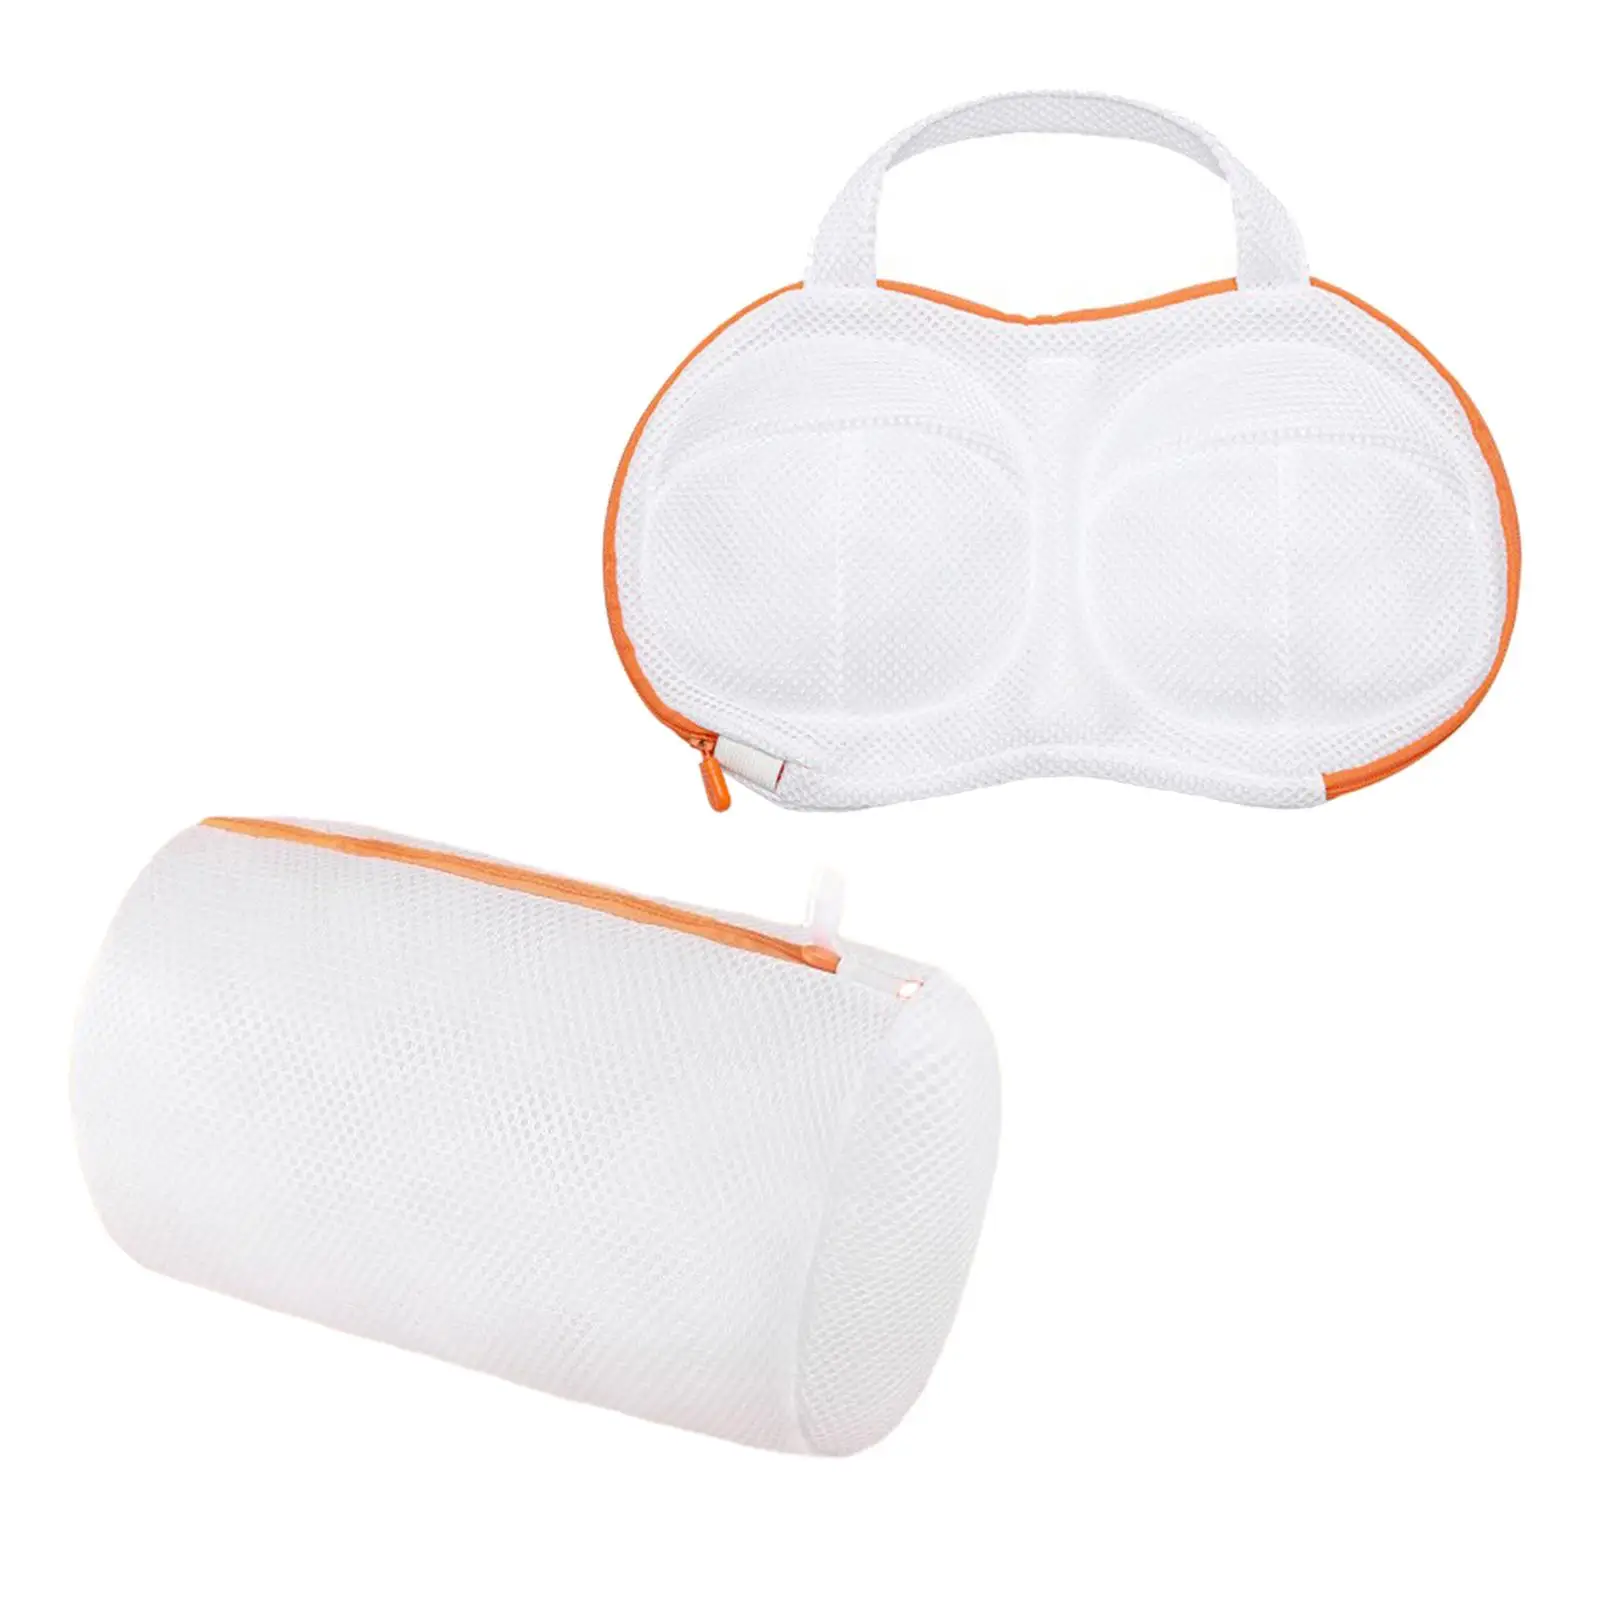 Mesh Laundry Washing Bags Organizer Portable Reusable for Delicate Travel Storage for Lingerie Travel Home Underwear Bra